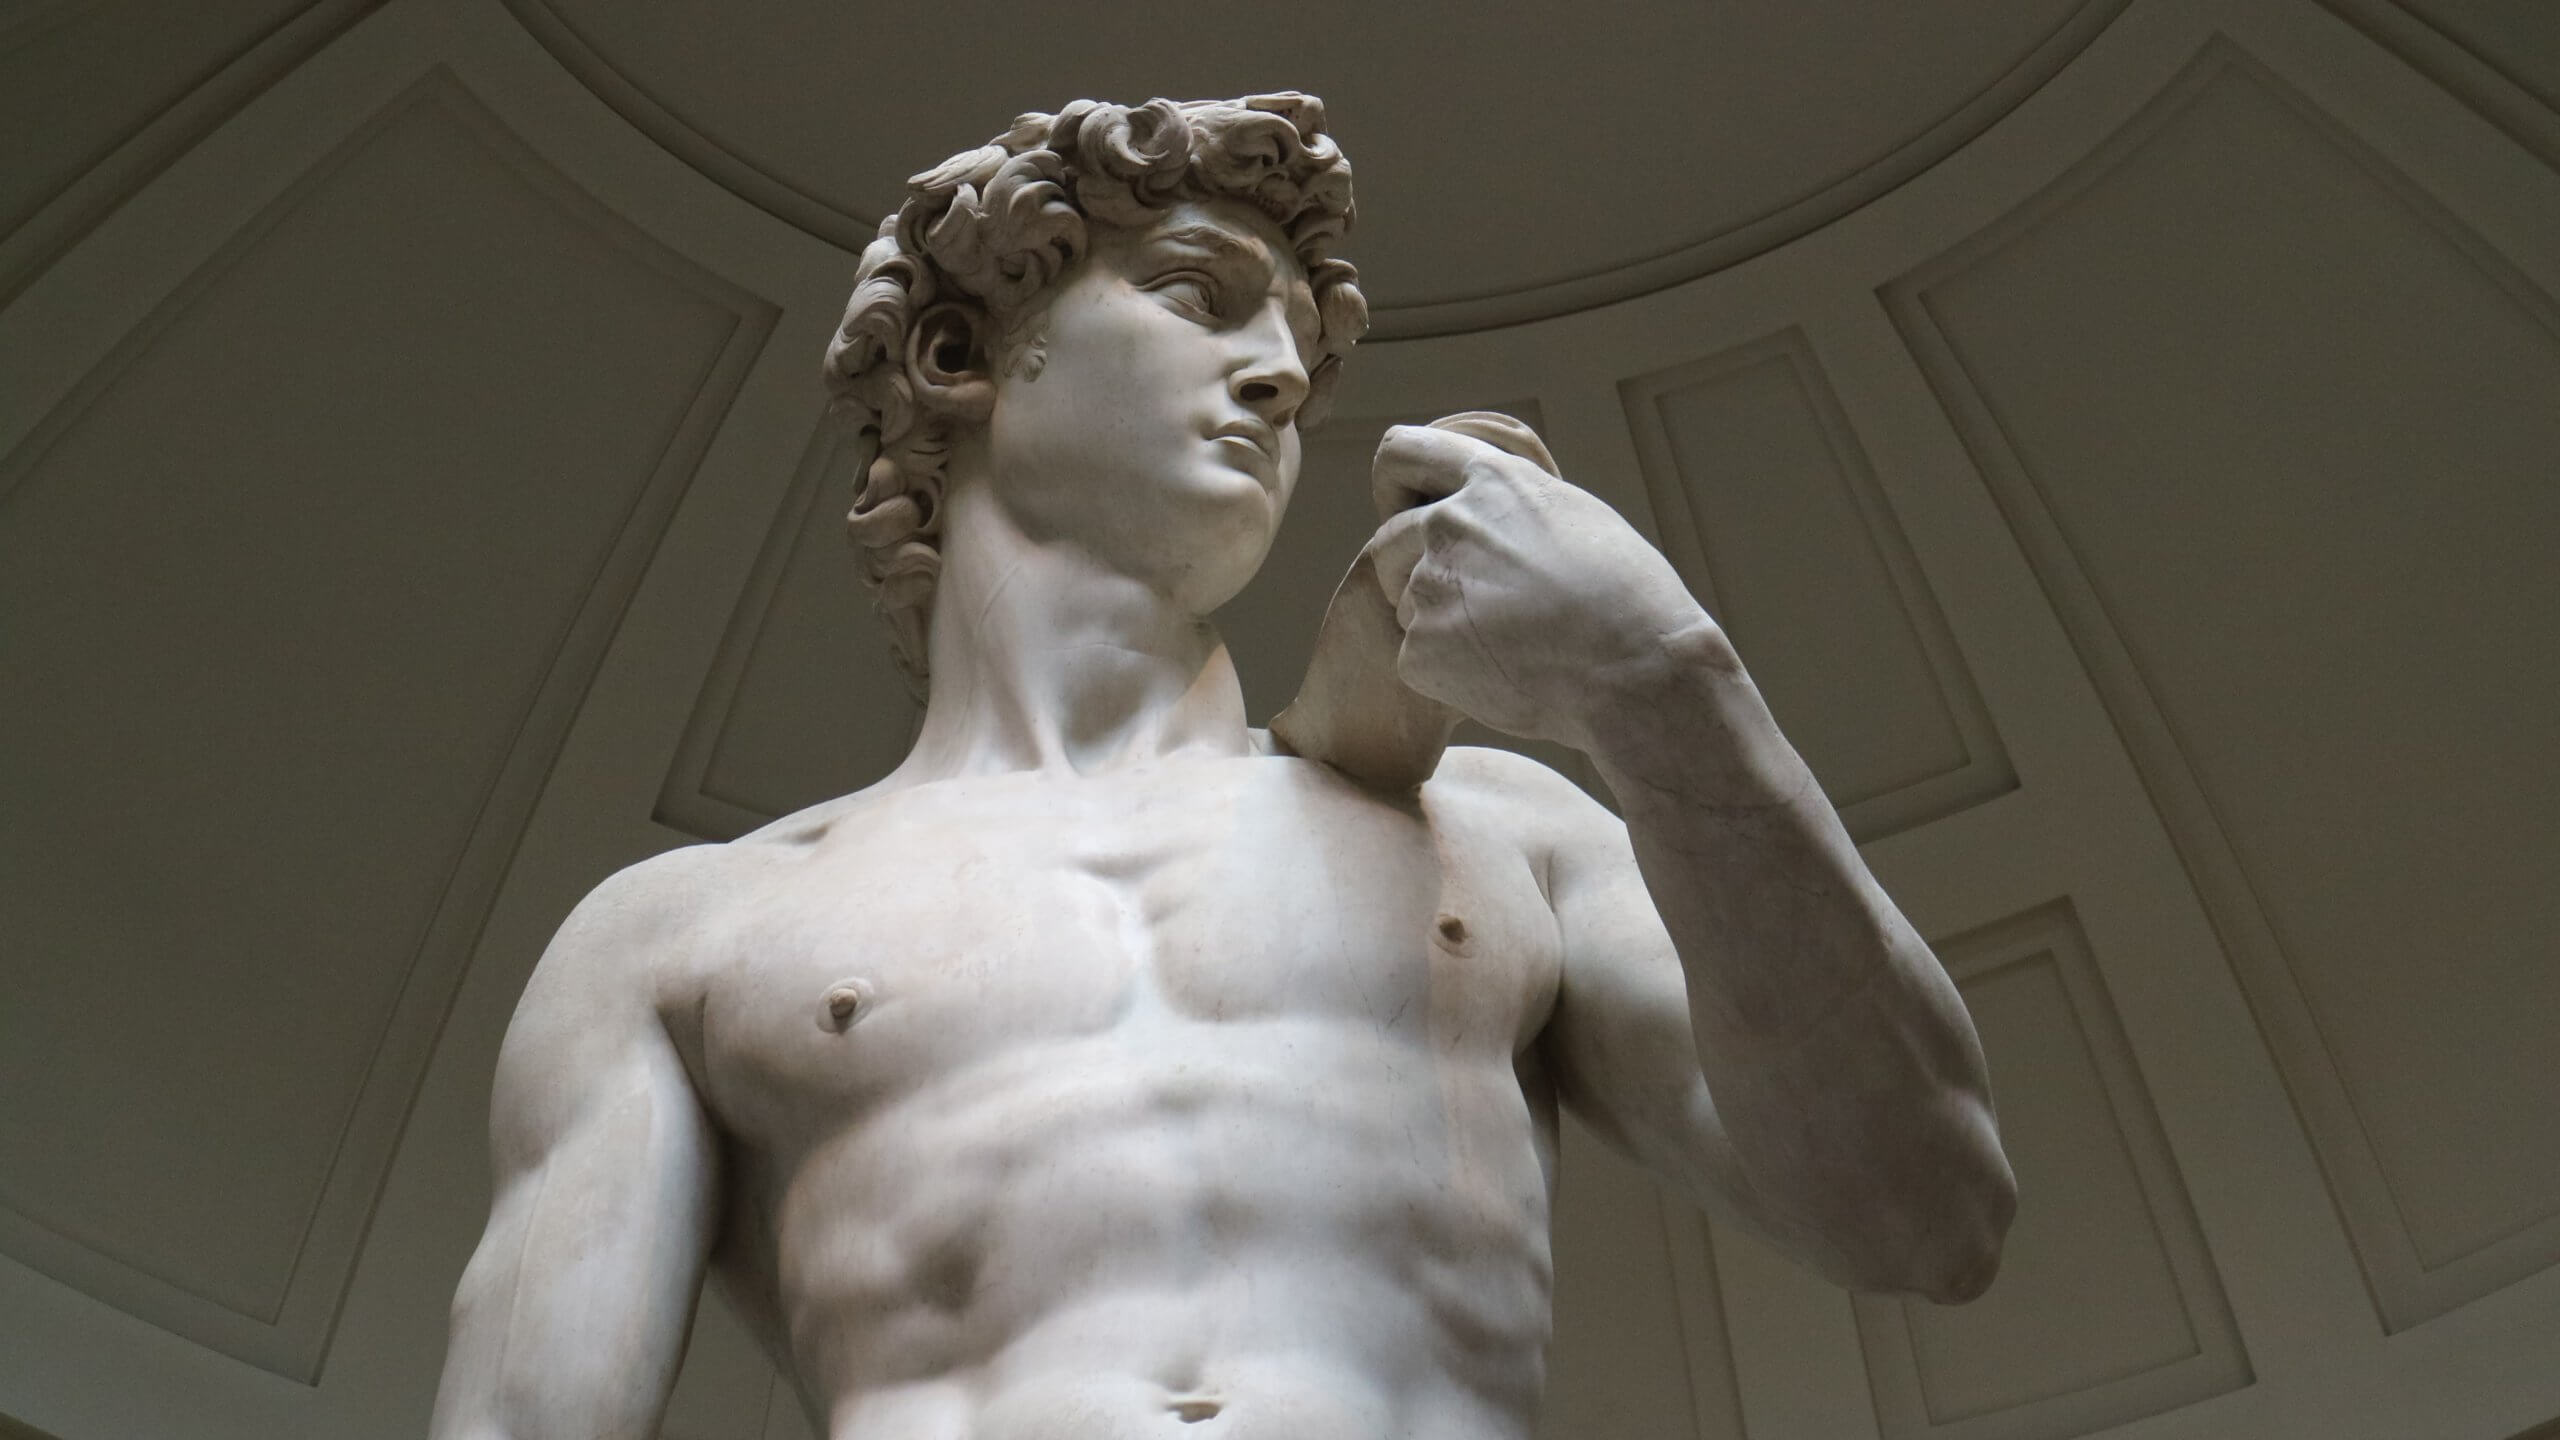 How to build a statue-worthy physique